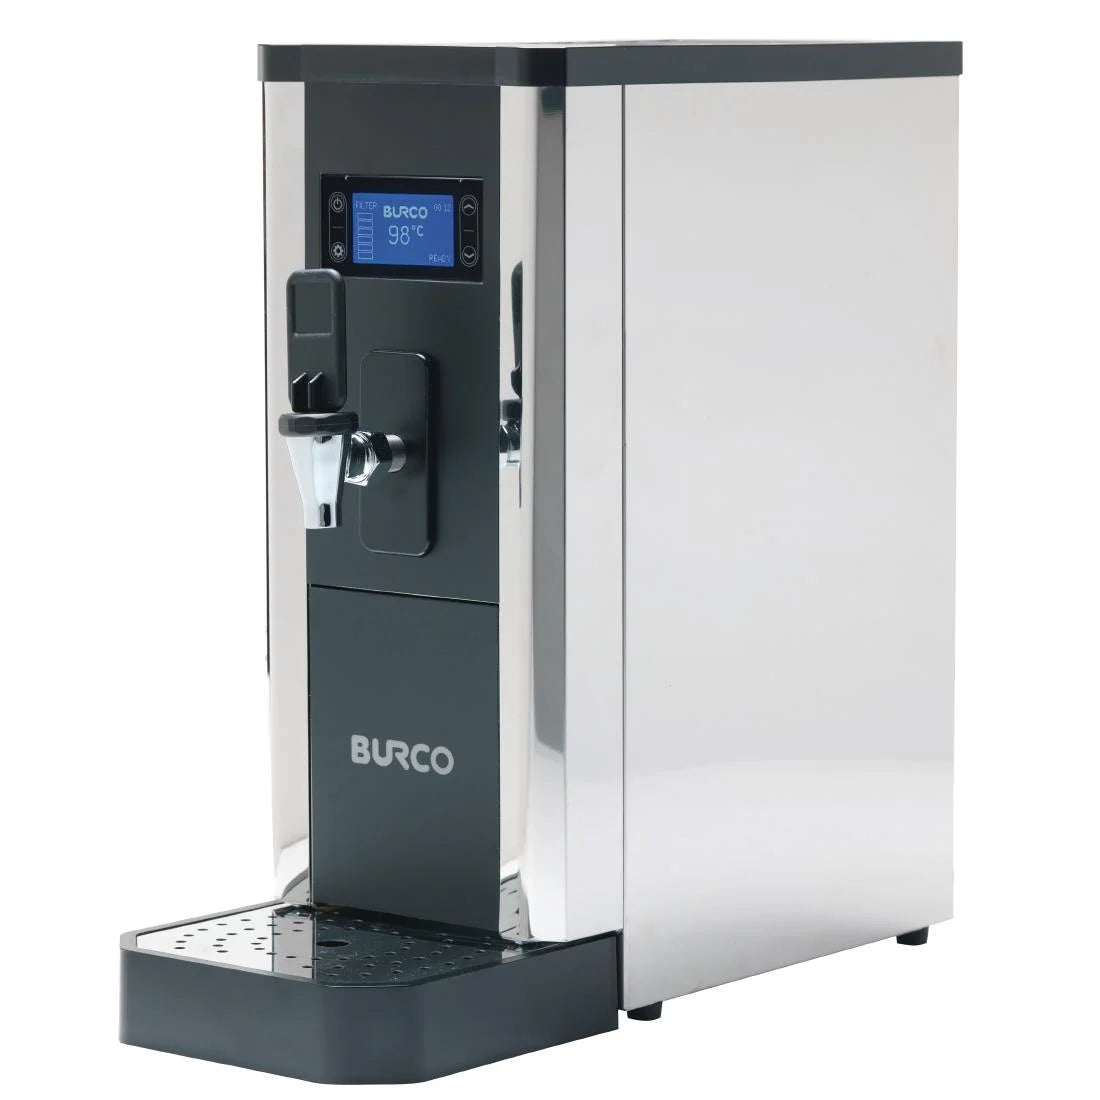 Burco Slimline 5Ltr Auto Fill Water Boiler With Built in Filtration 70012.Product Ref:00572.MODEL:70012.🚚 3-5 Days Delivery